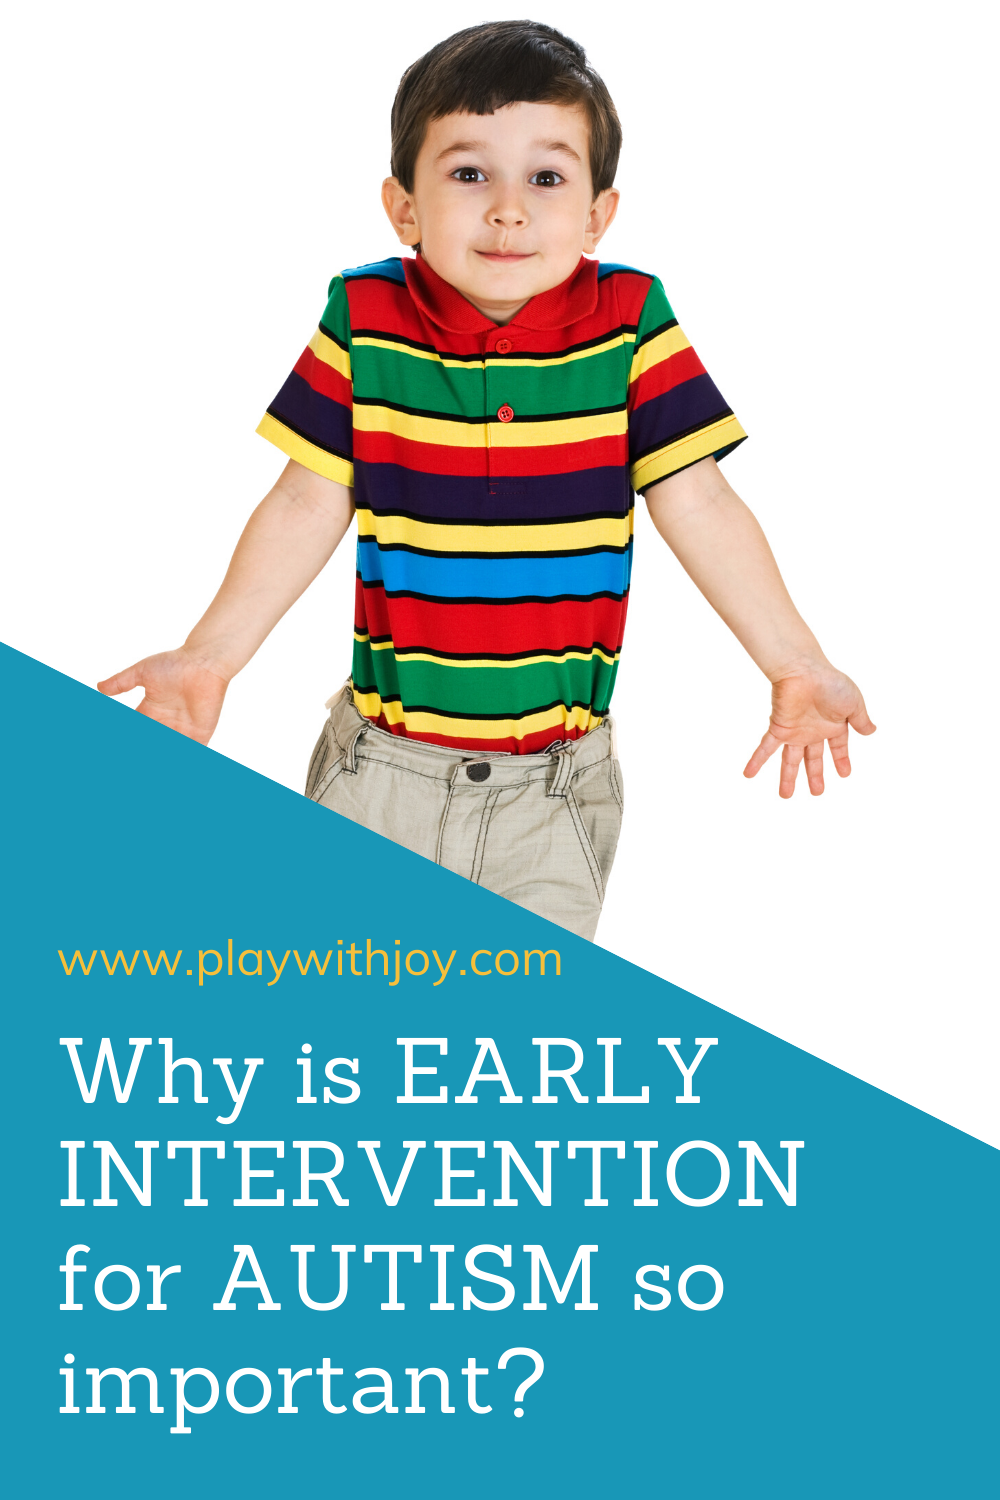 Why is Early Intervention for Autism Important? â Play With Joy, LLC